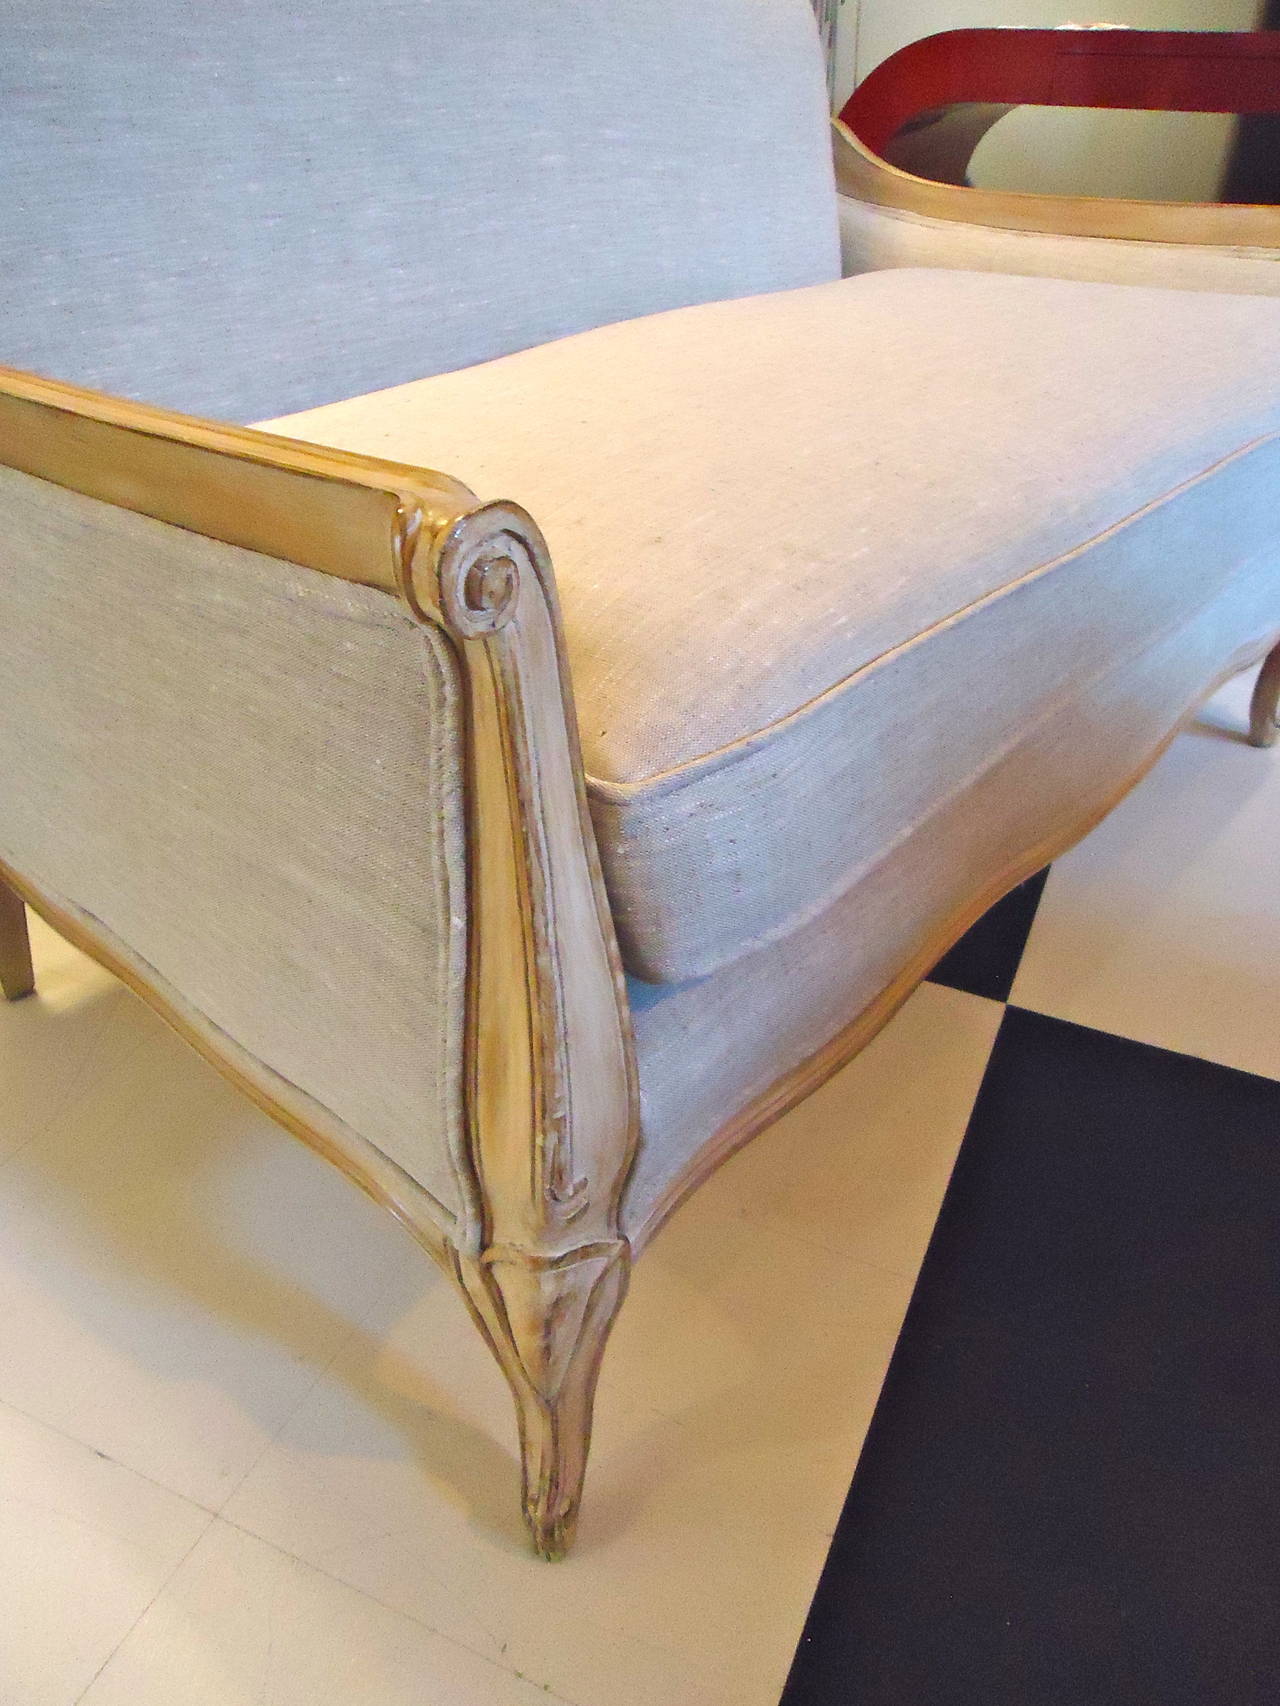 Creamy antiqued carved wood loveseat by Meyer Gunther Martini (no label), newly refurbished in 100% Irish linen fabric.  Neutral and sophisticated.